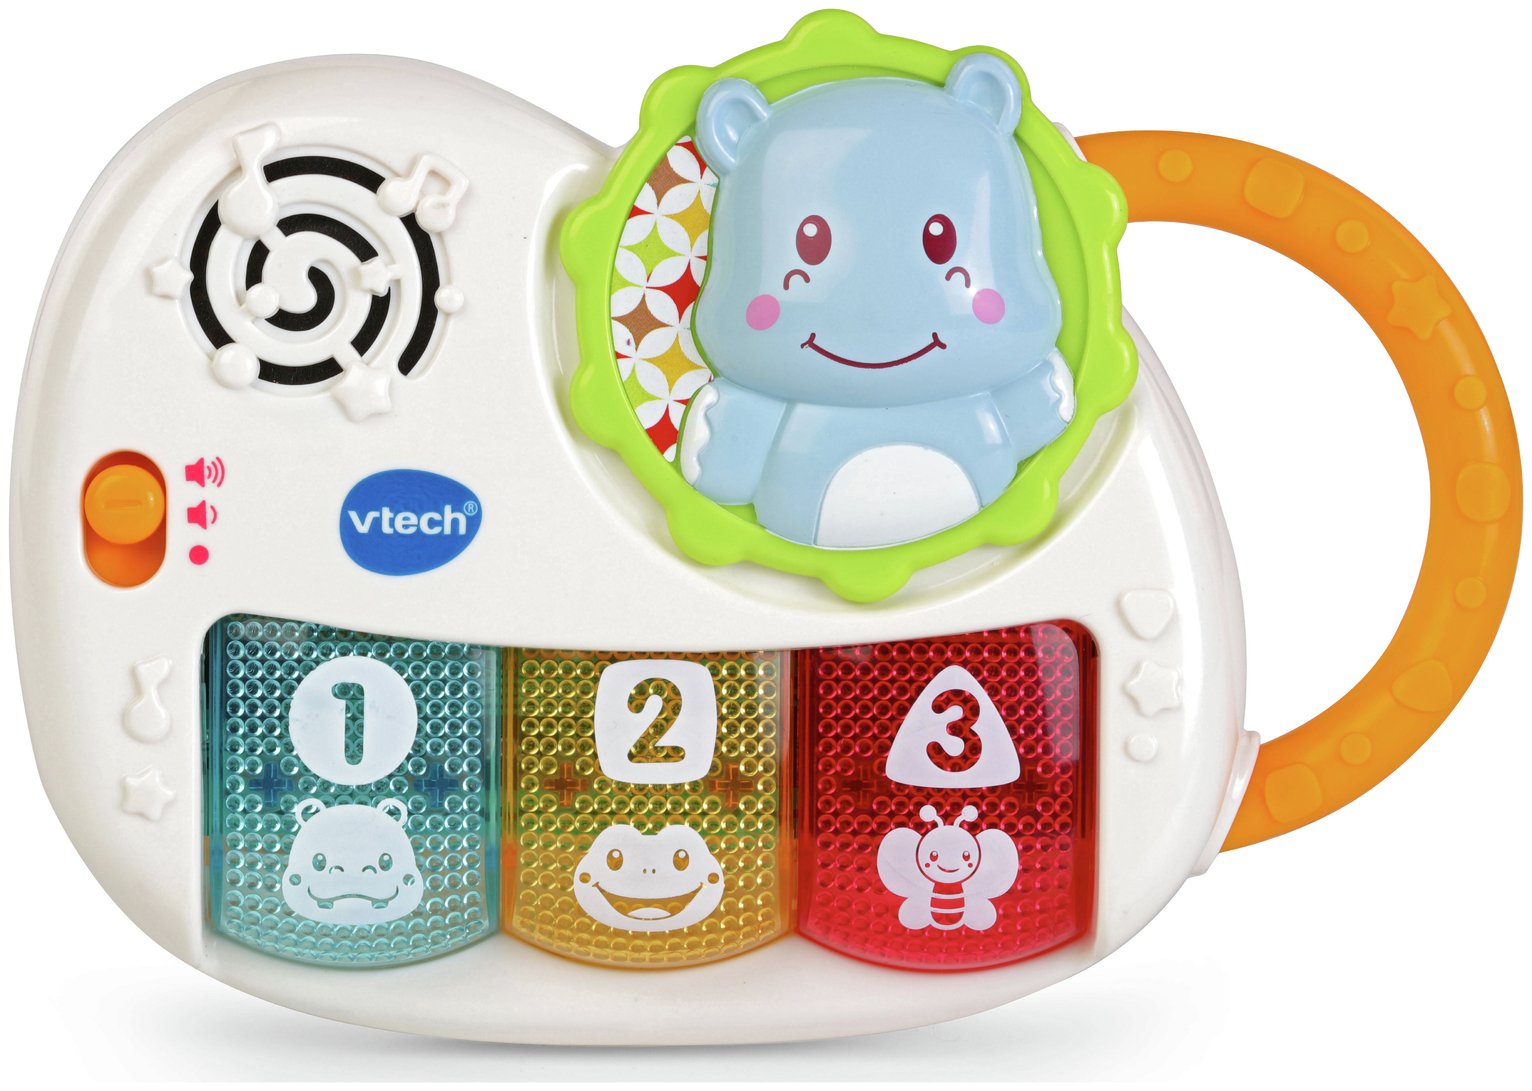 VTech Baby My 1st Gift Set Review